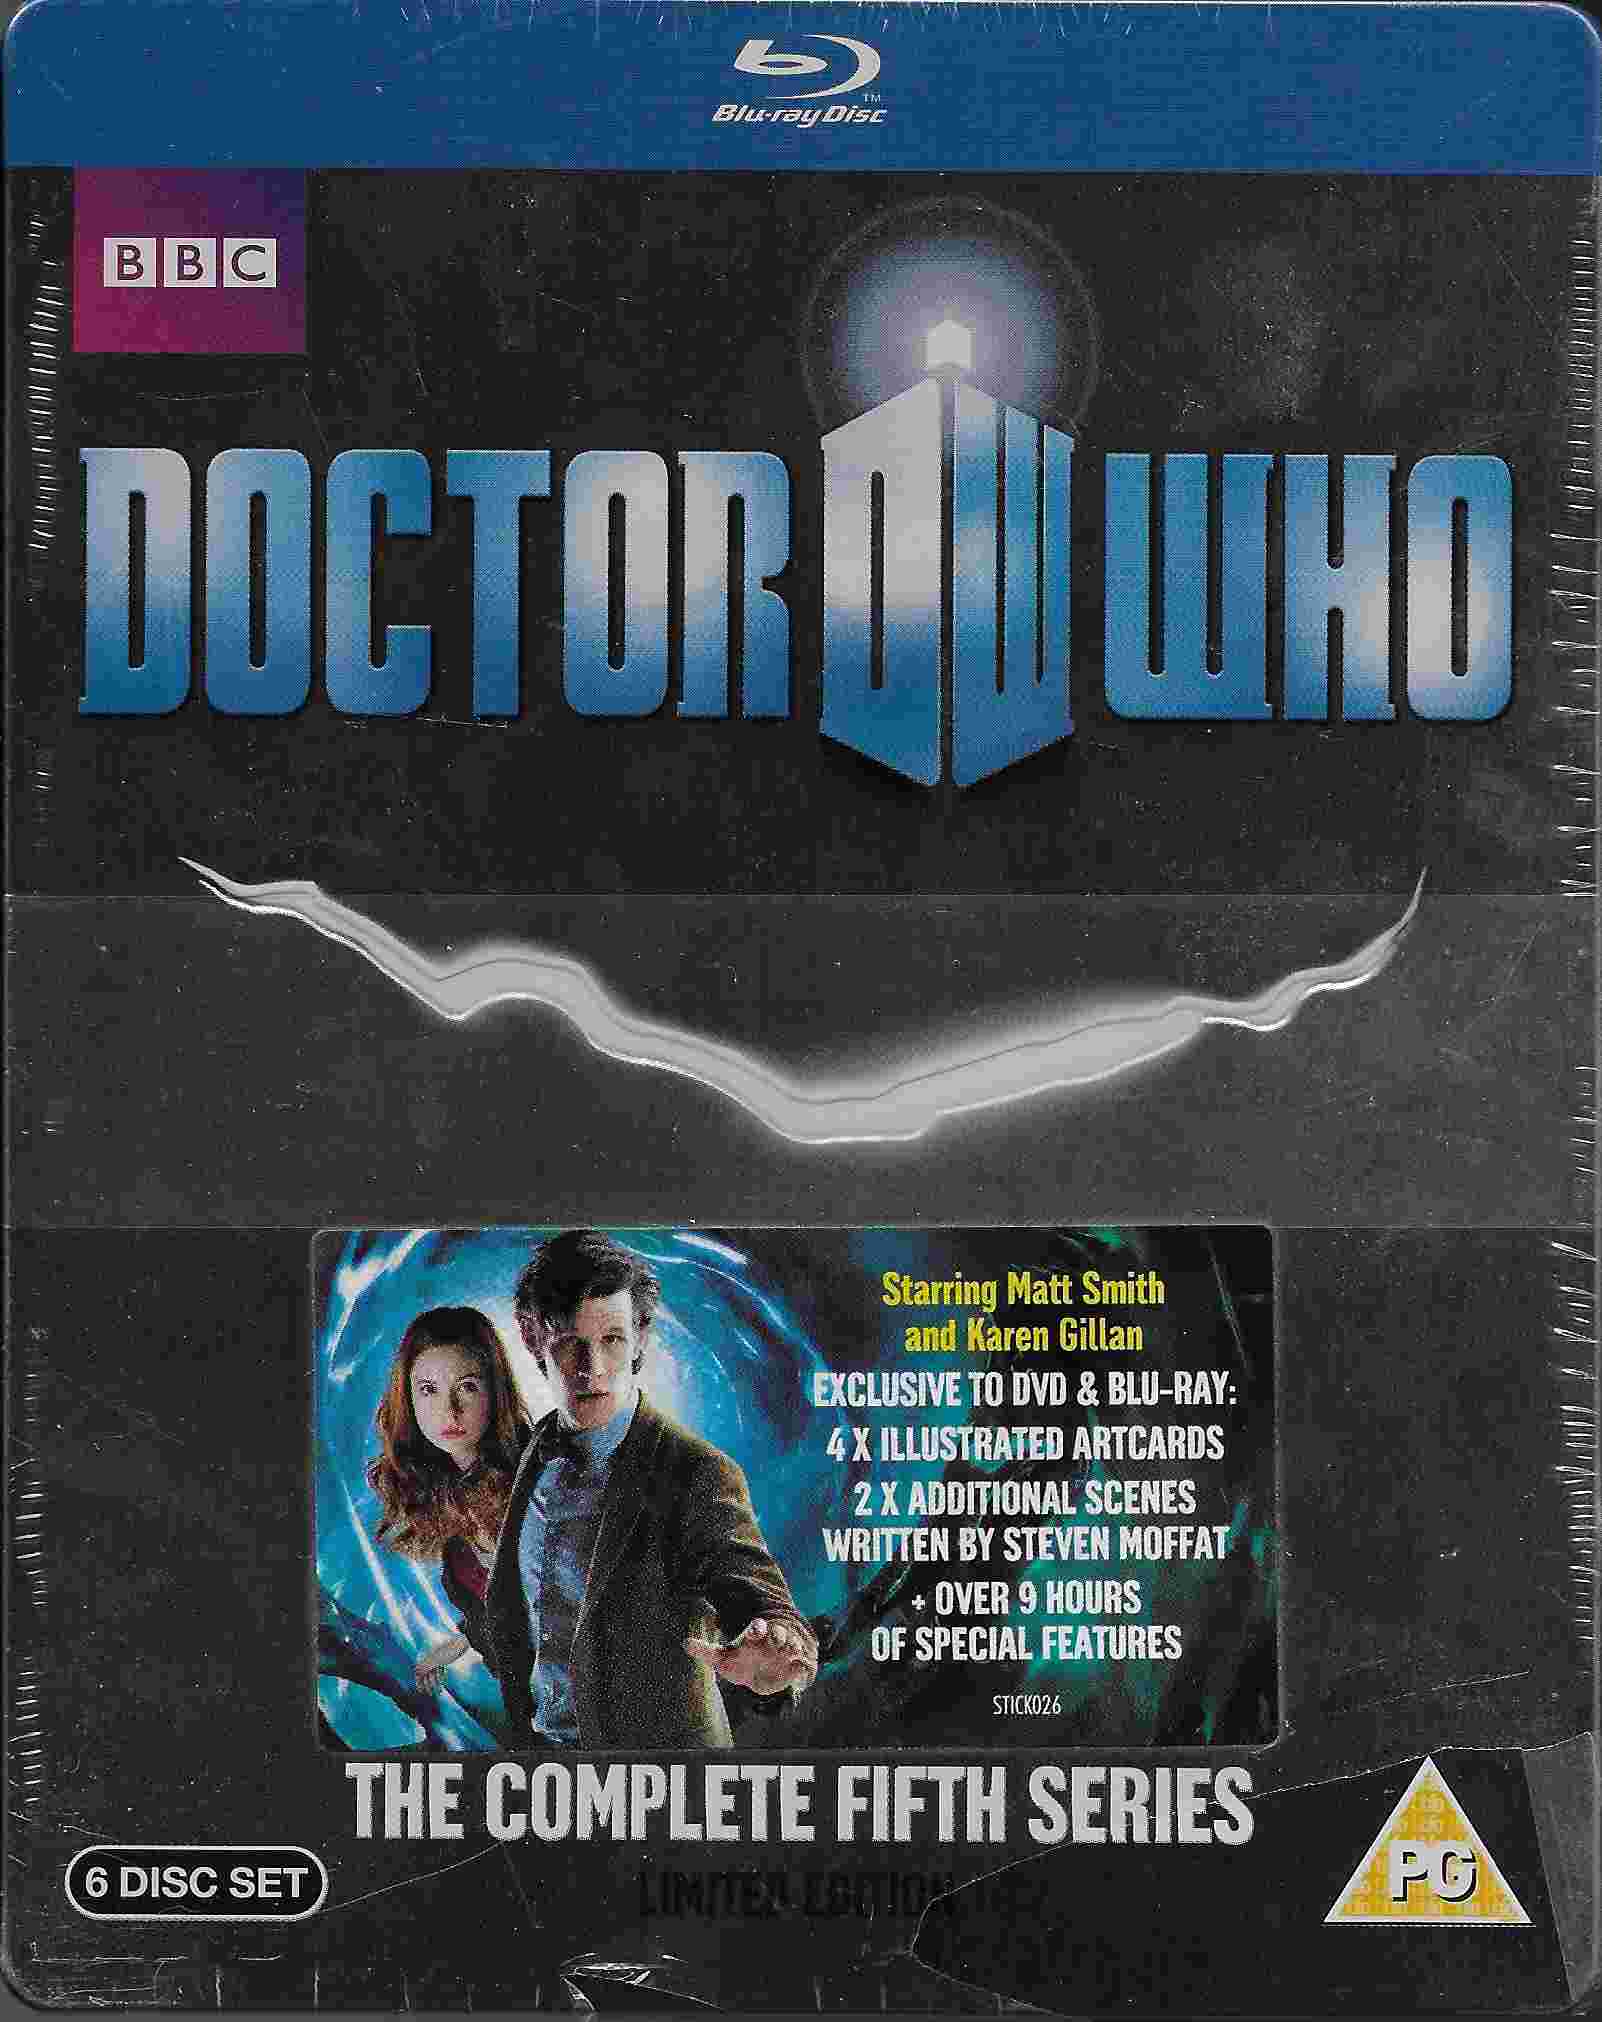 Picture of BBCBD 0130 Doctor Who - The complete fifth series by artist Various from the BBC records and Tapes library